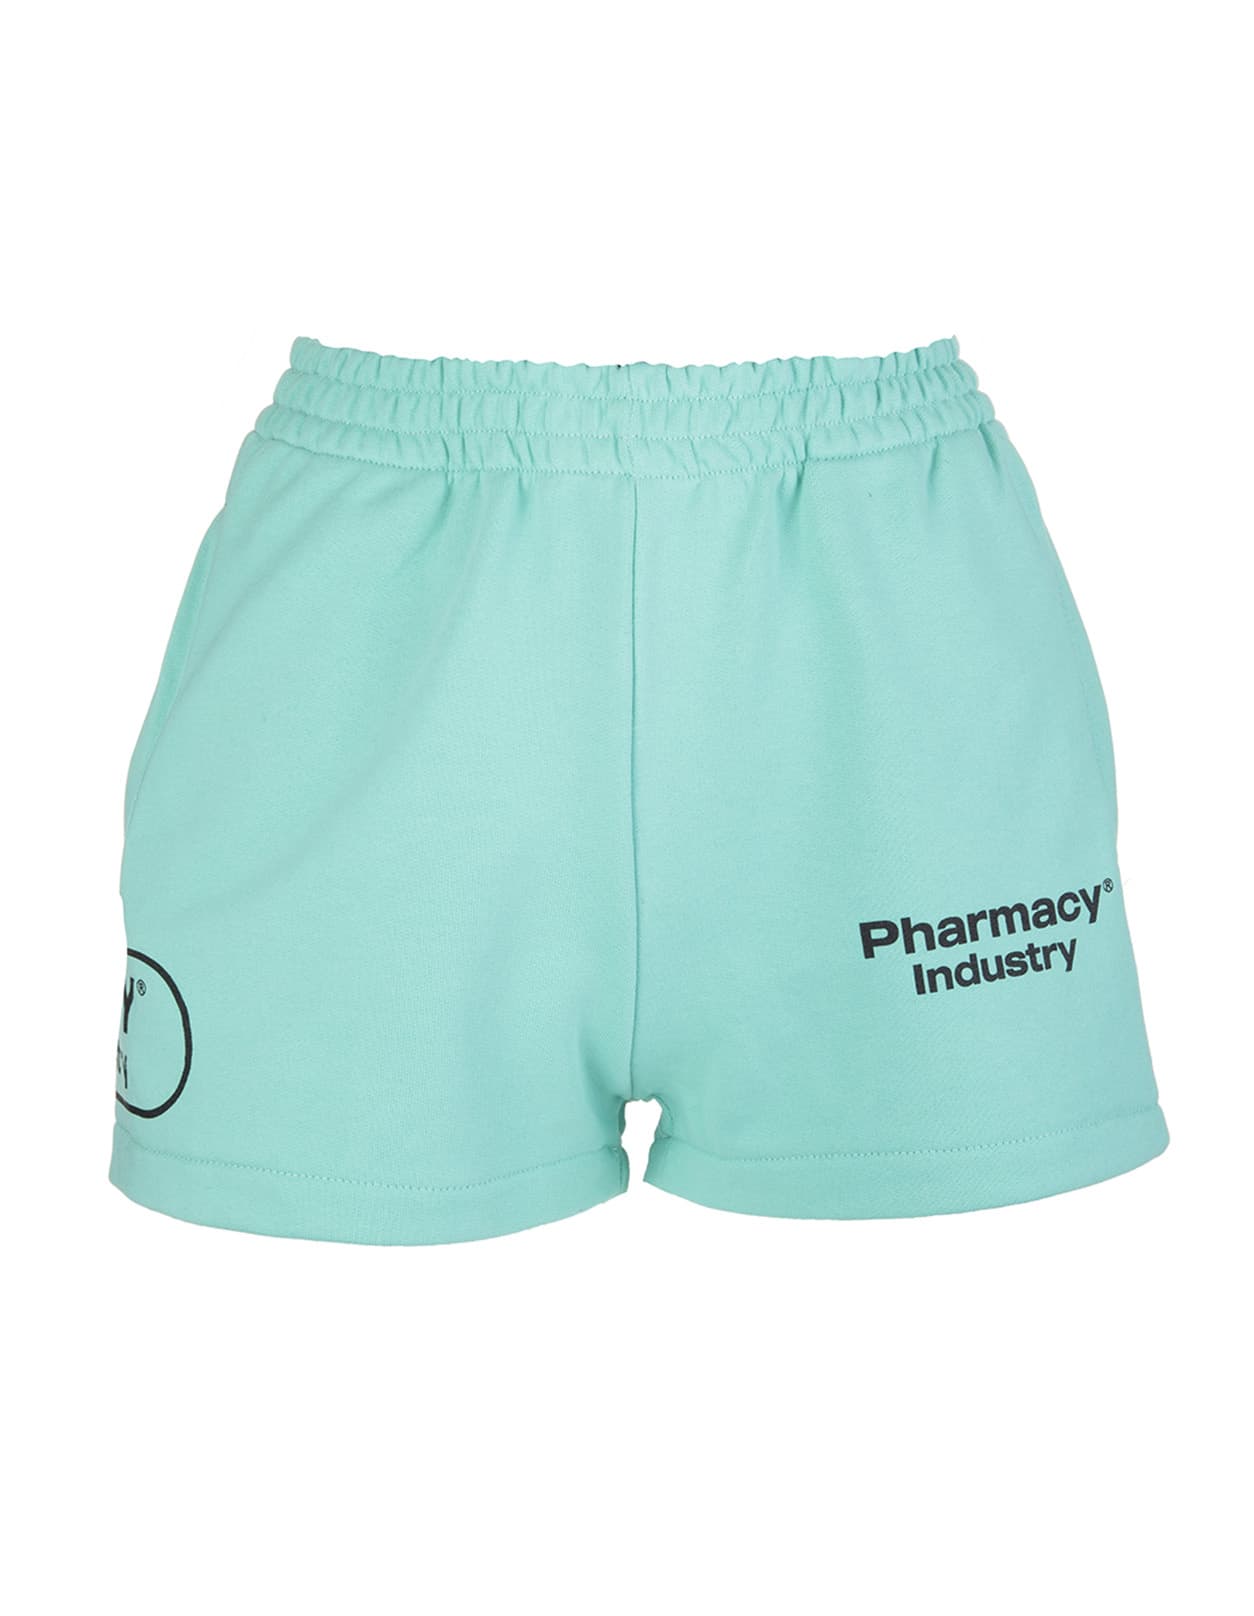 Pharmacy Industry Woman Mint Shorts With Logos